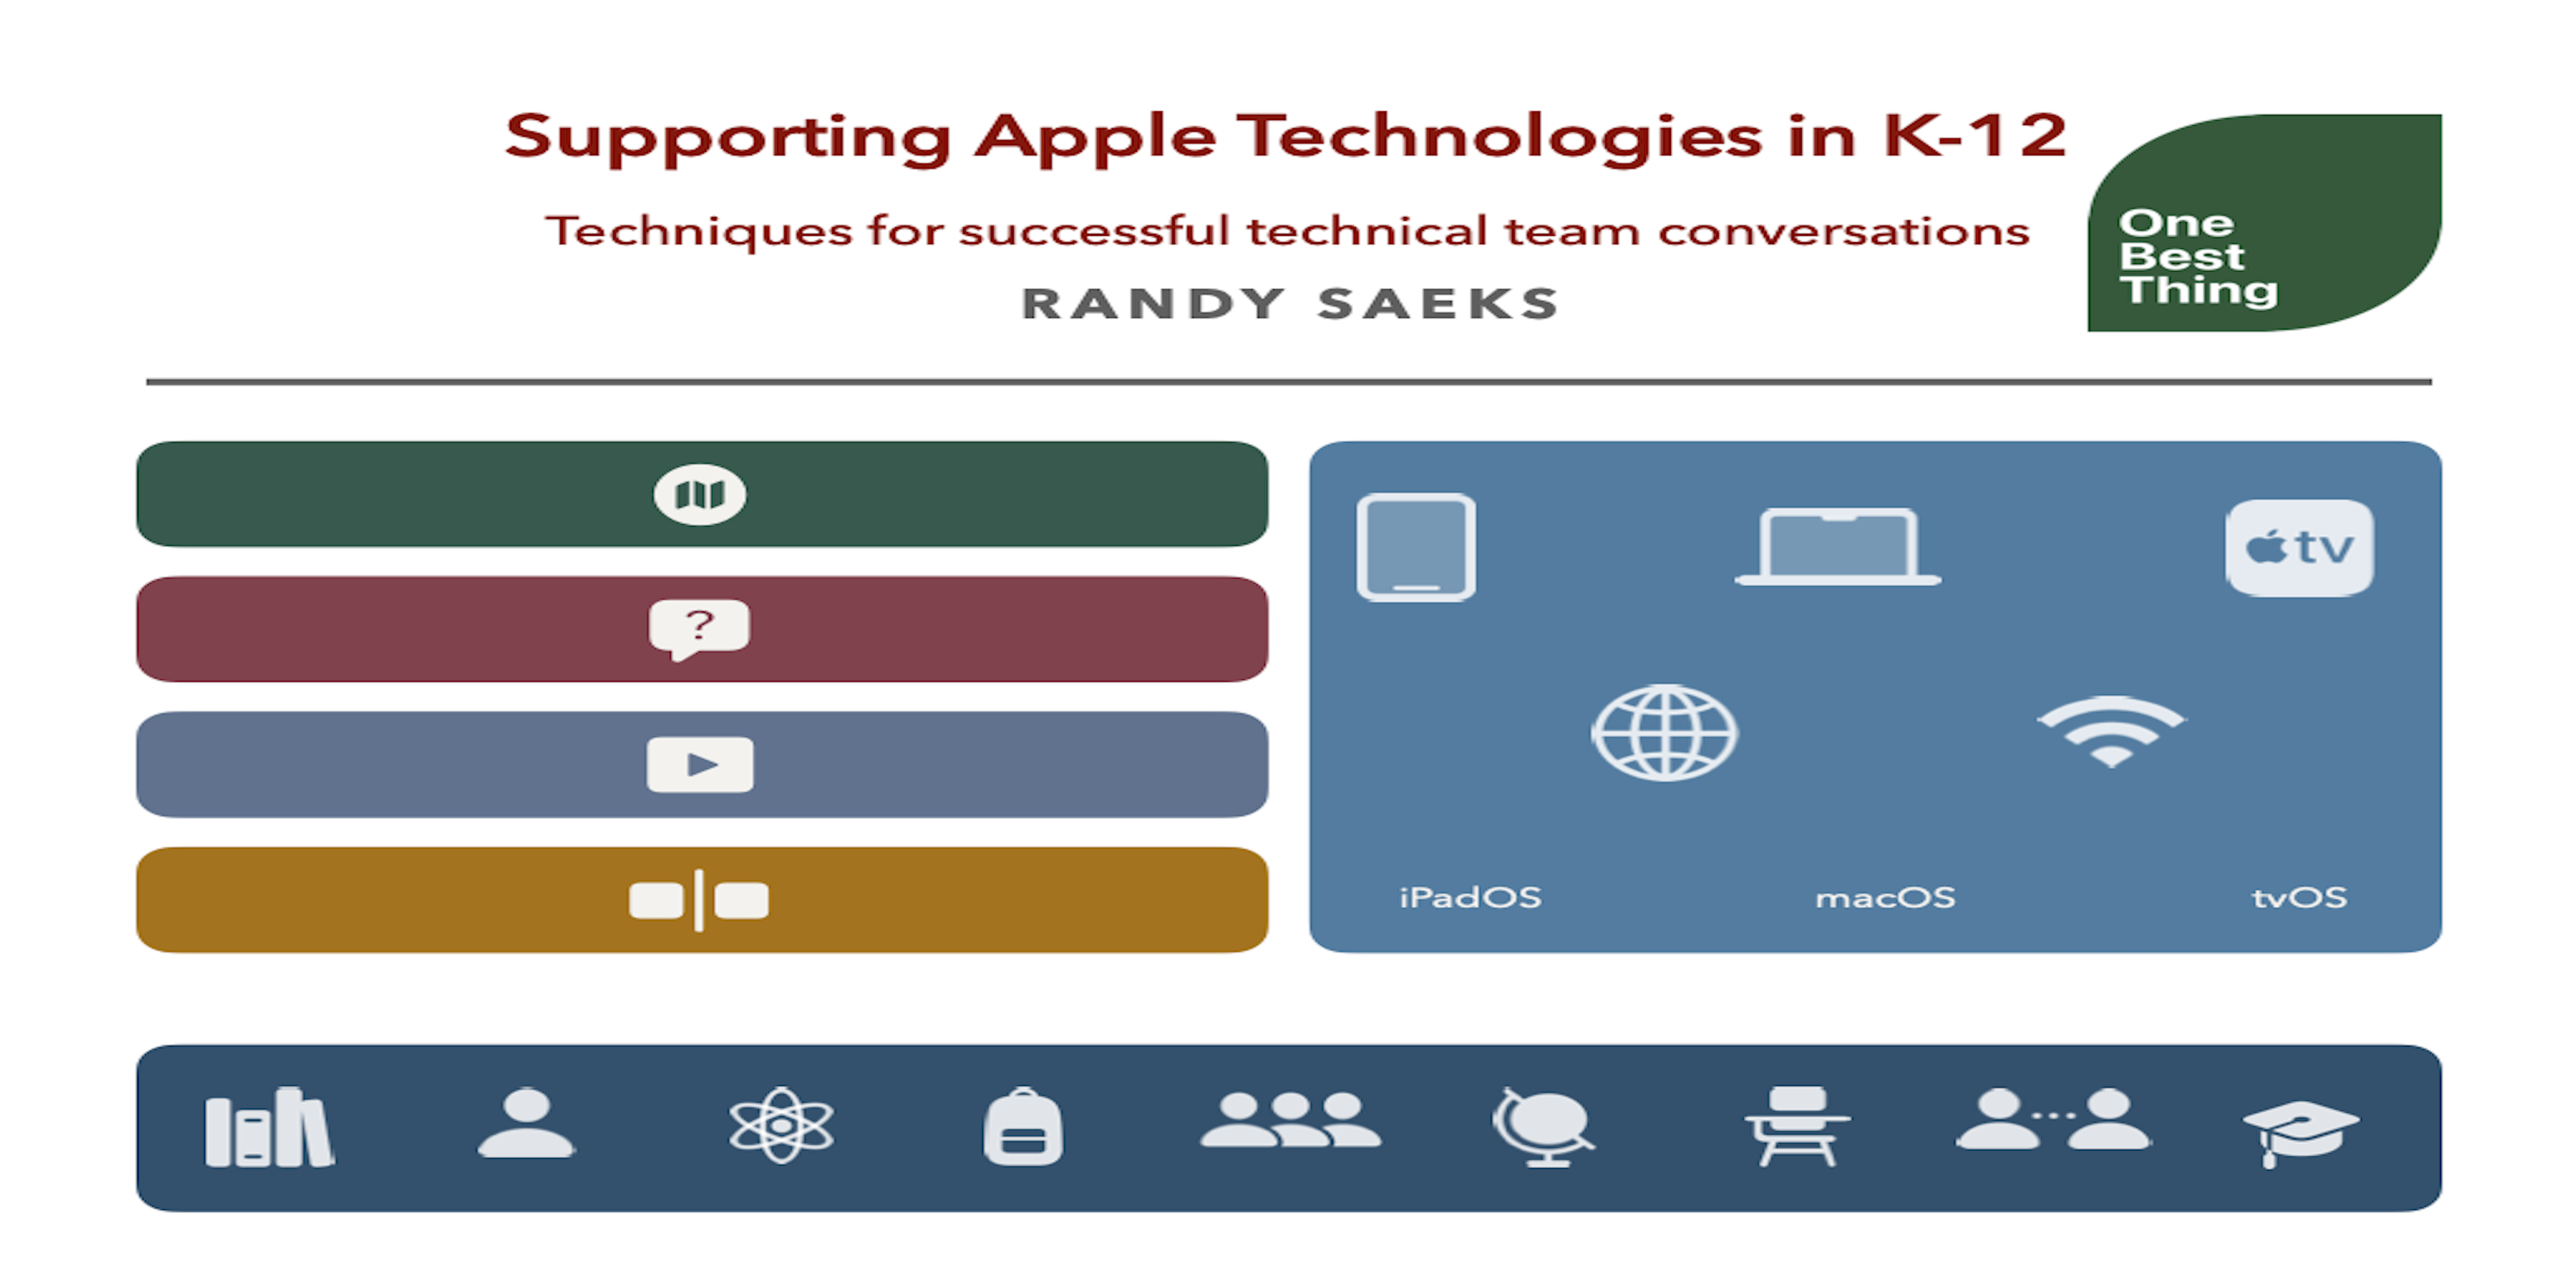 Supporting Apple Technologies in K-12: Techniques for successful technical team conversations